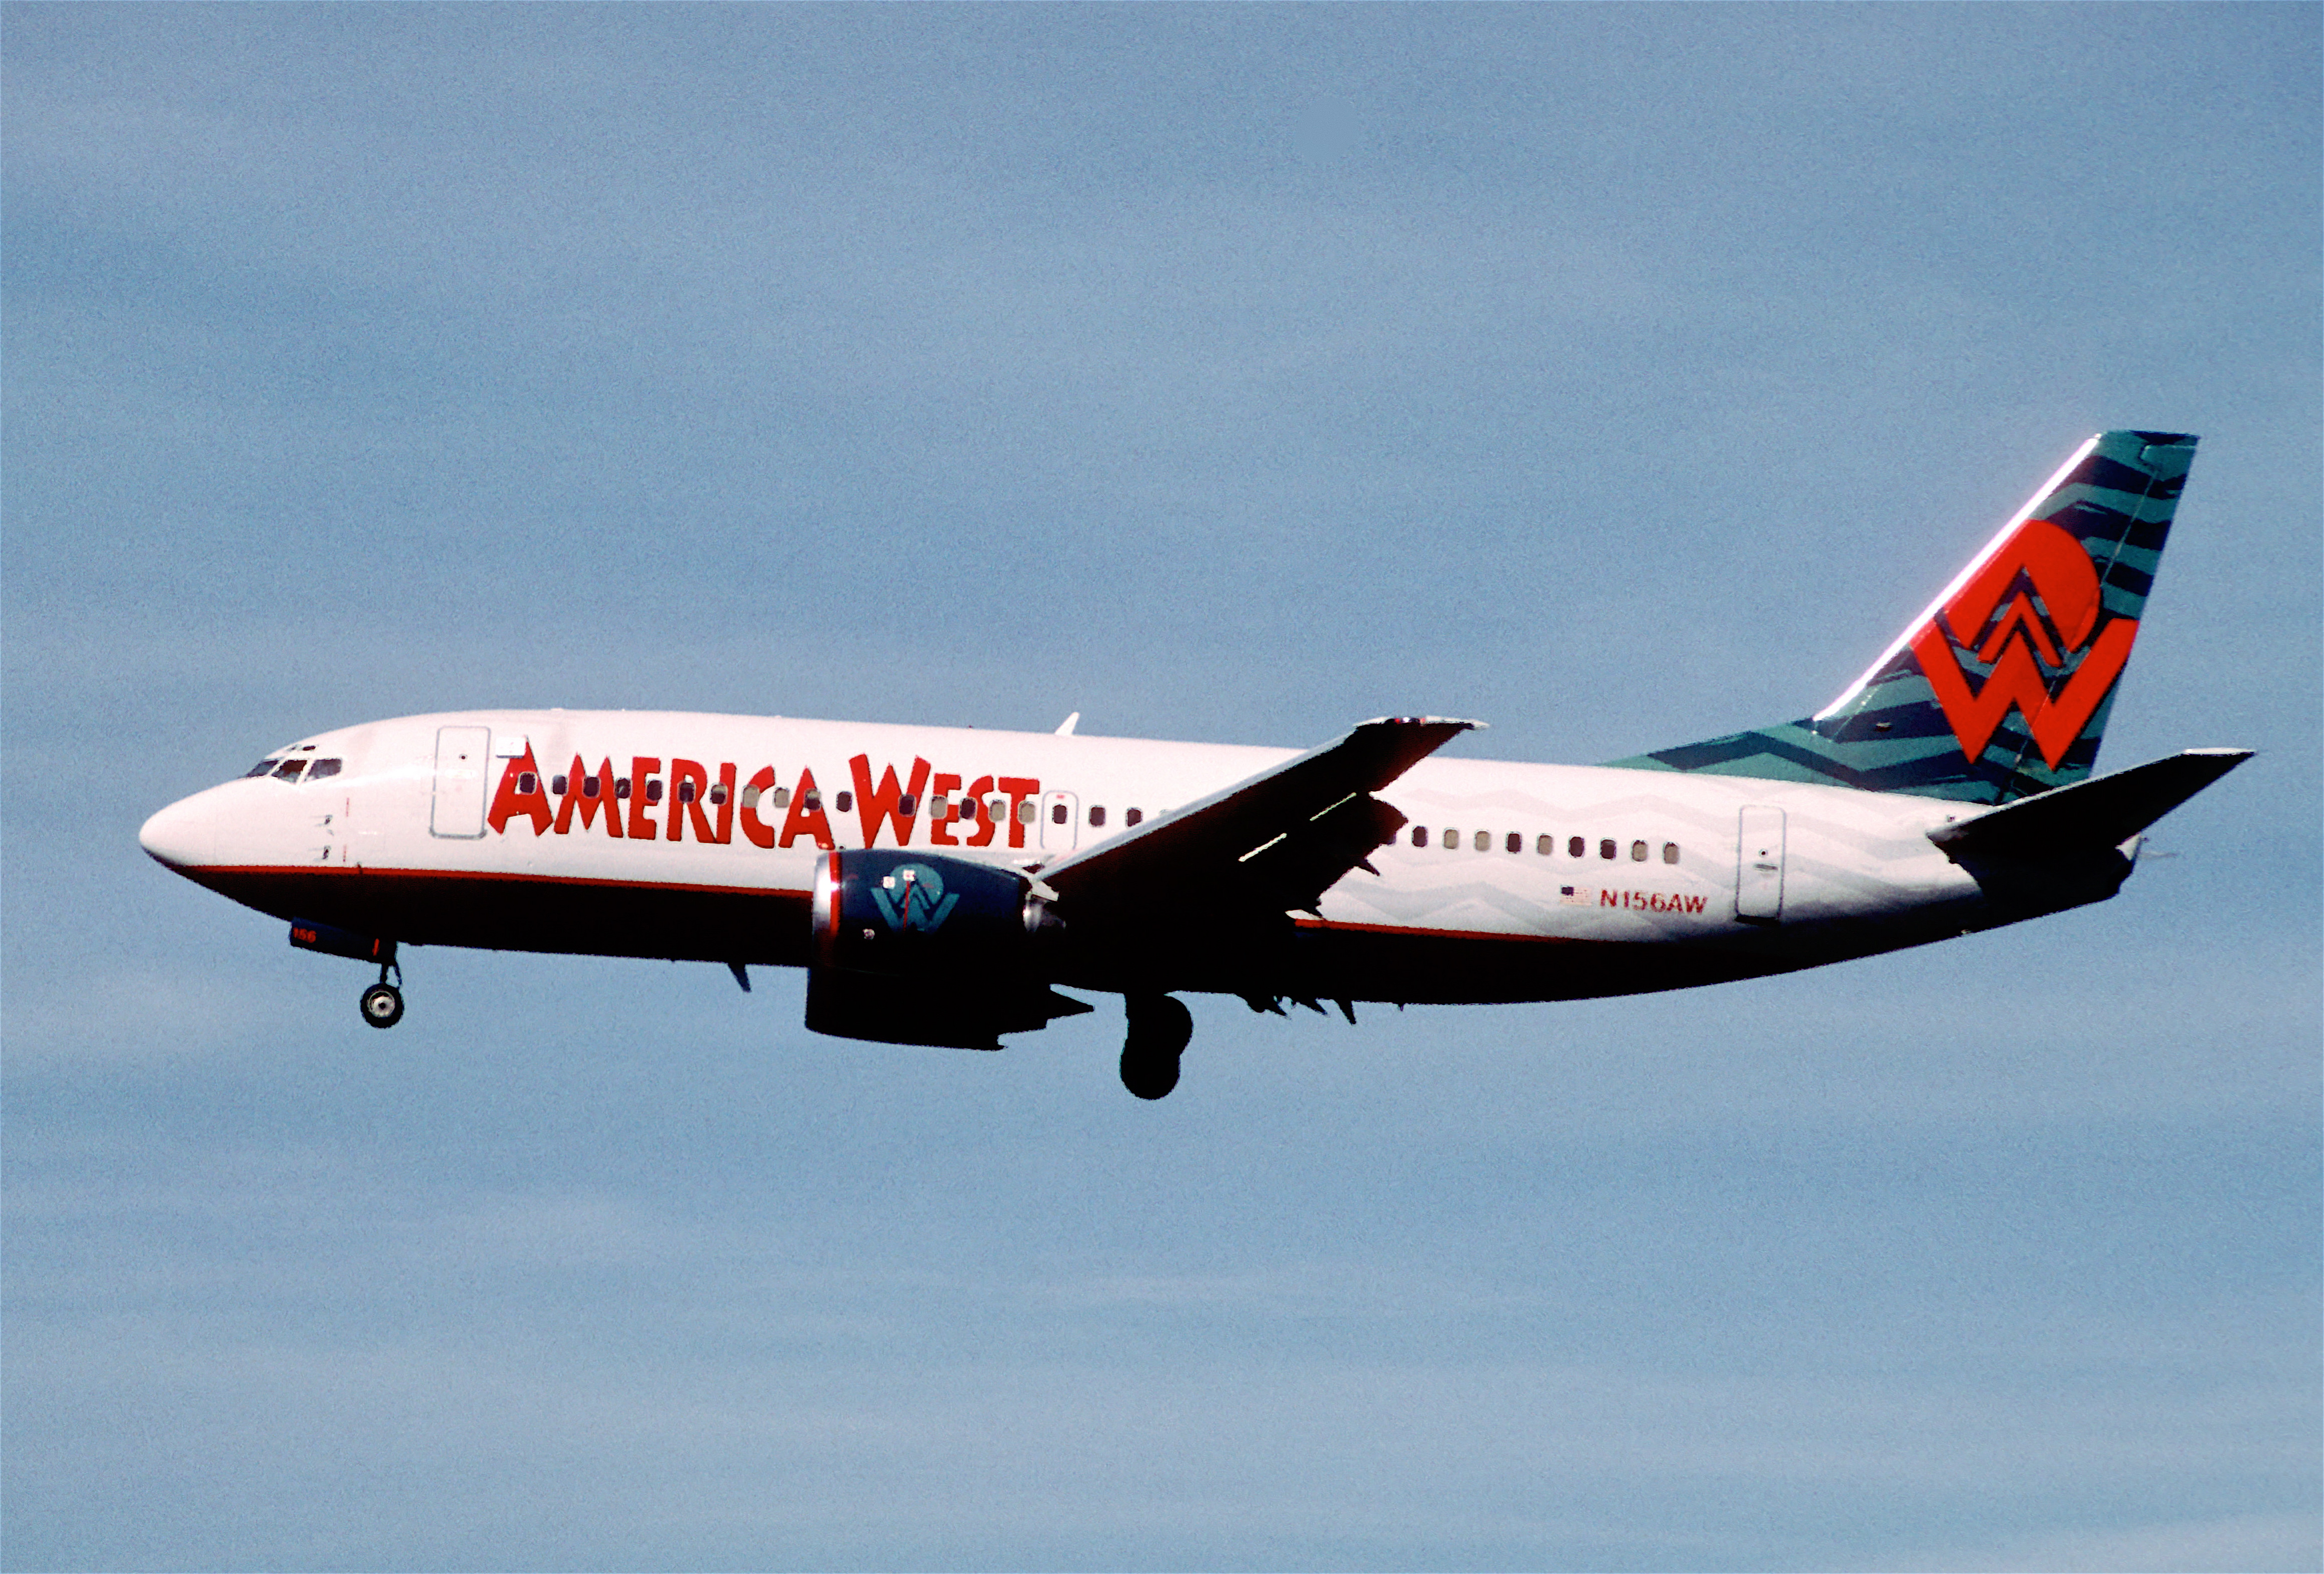 397cn - America West Airlines Boeing 737-3G7; N156AW@LAX;13.02.2006 (5473649170)